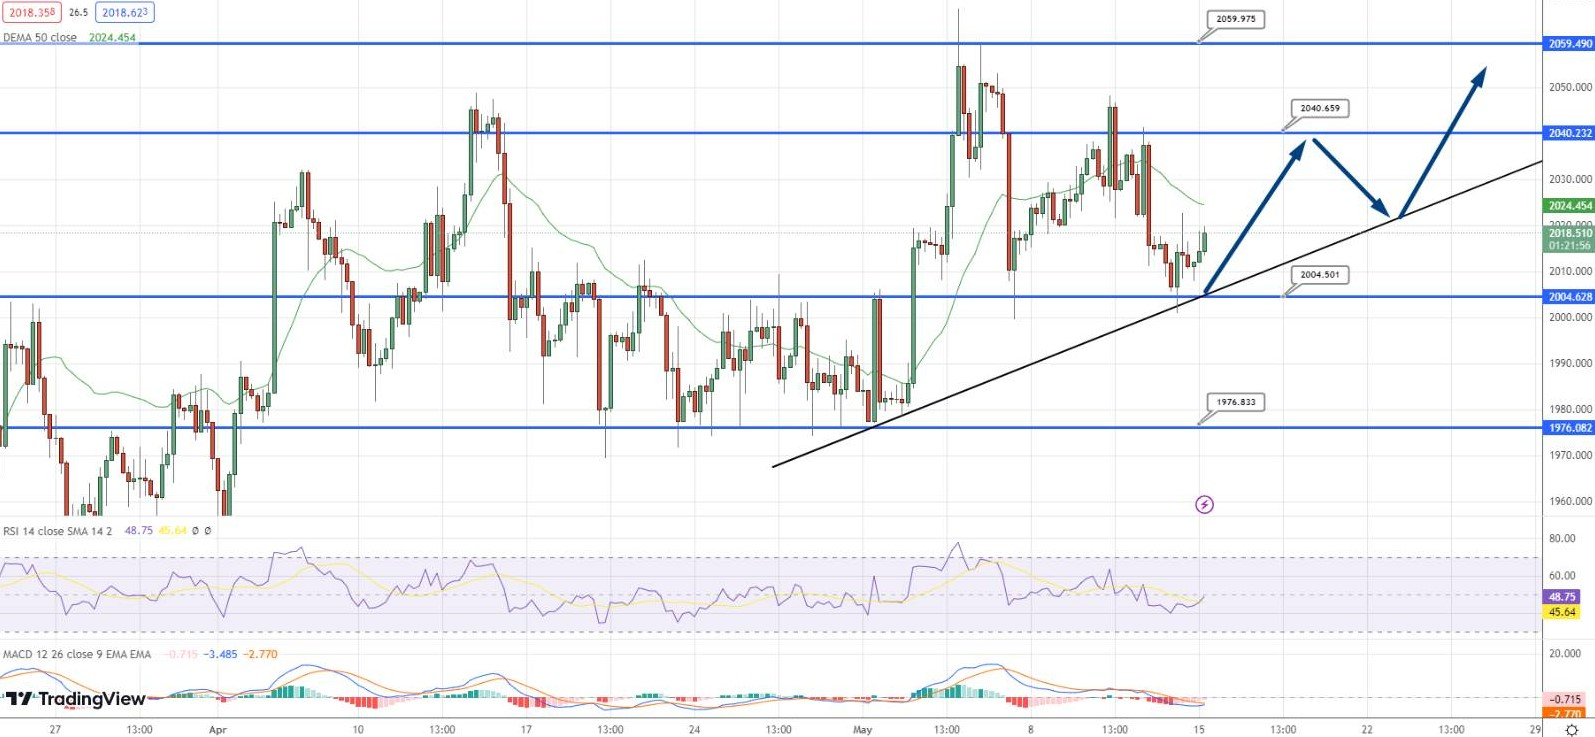  GOLD Price Chart - Source: Tradingview